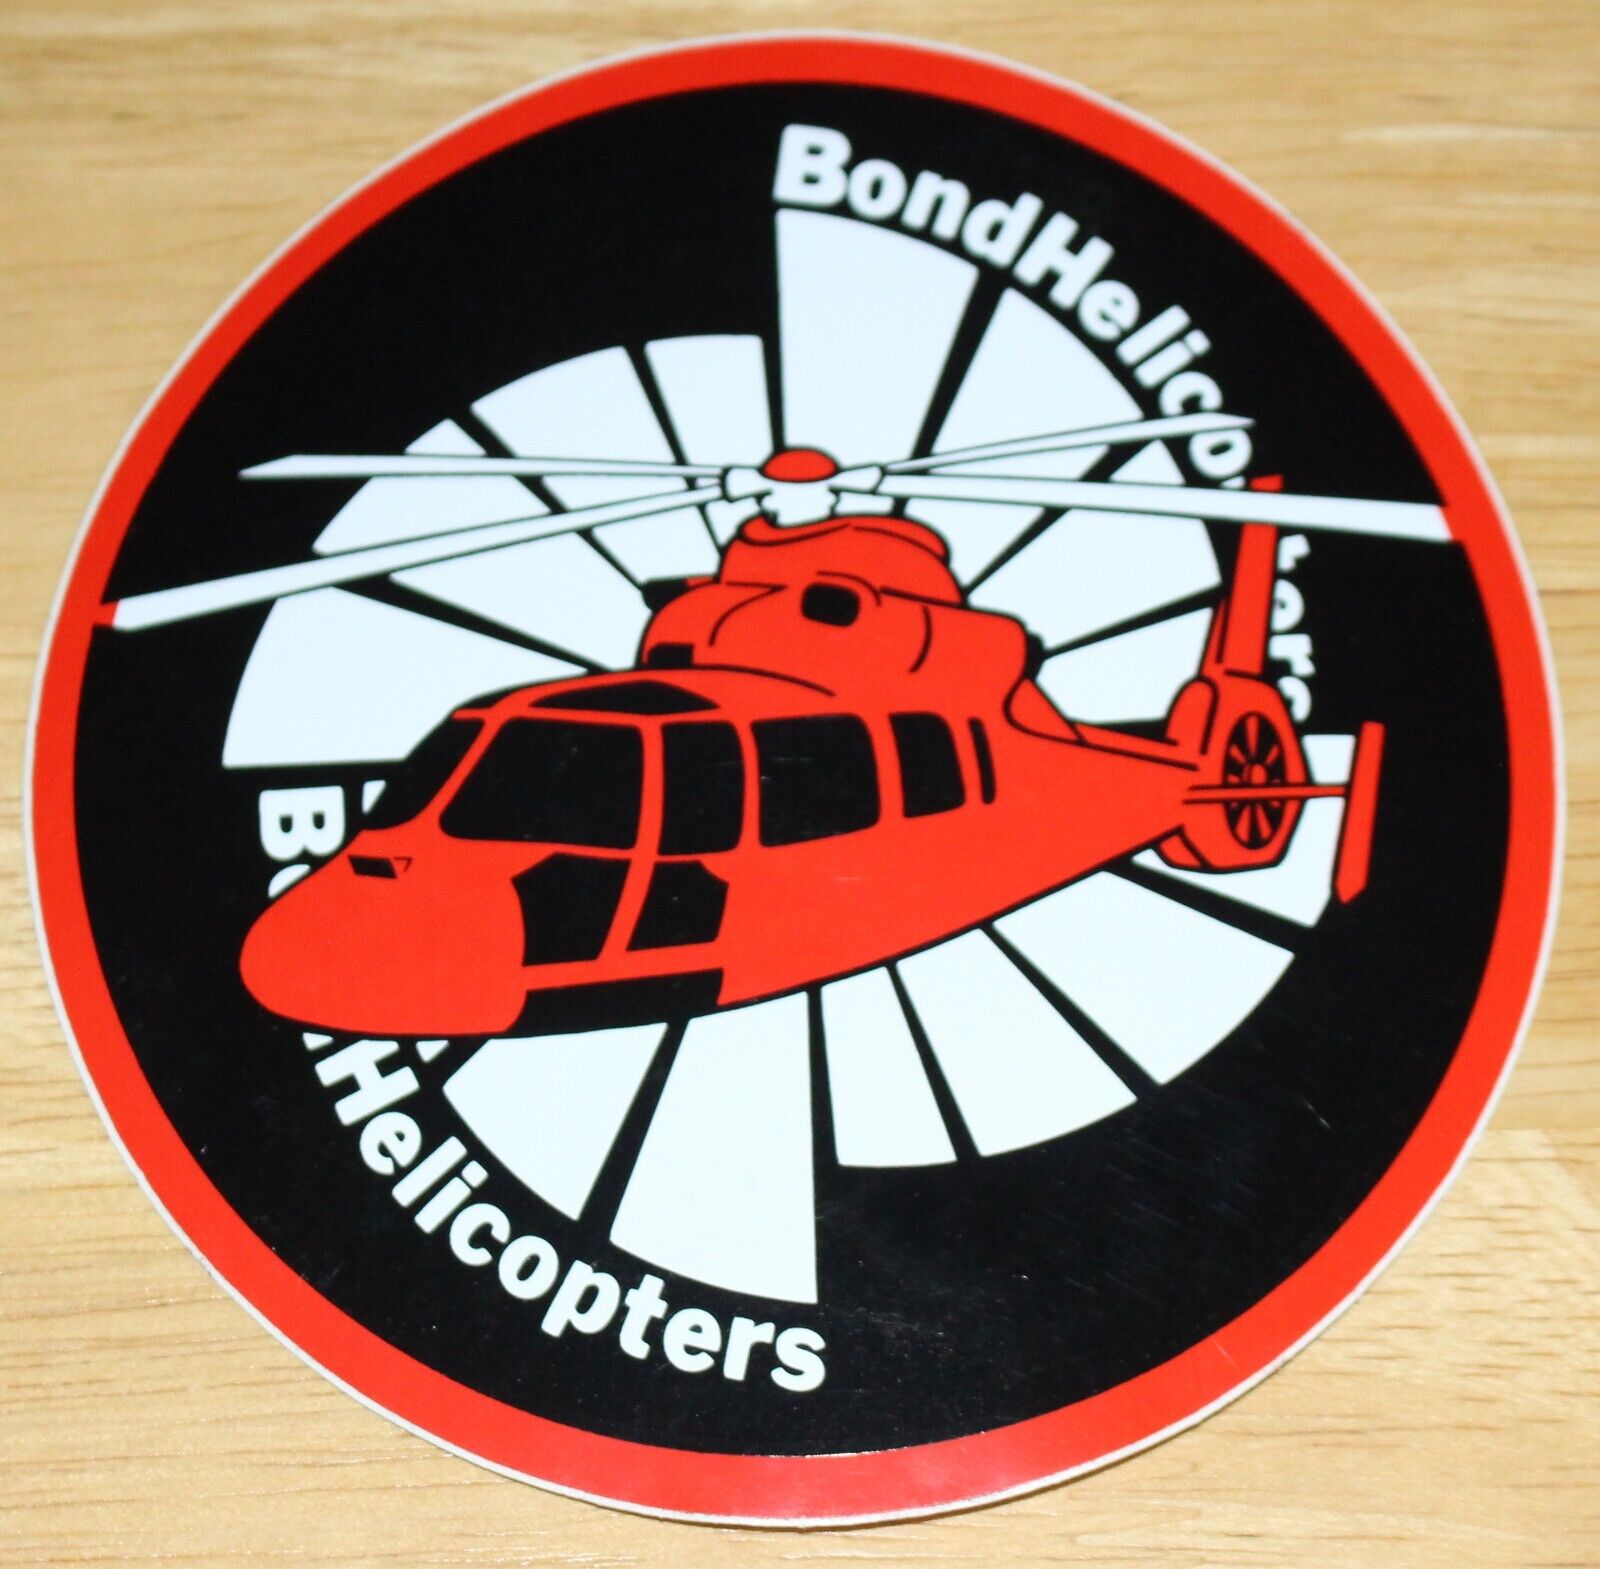 Bond Helicopters (UK) Aerospatiale AS.365 Dauphin 2 Helicopter Sticker